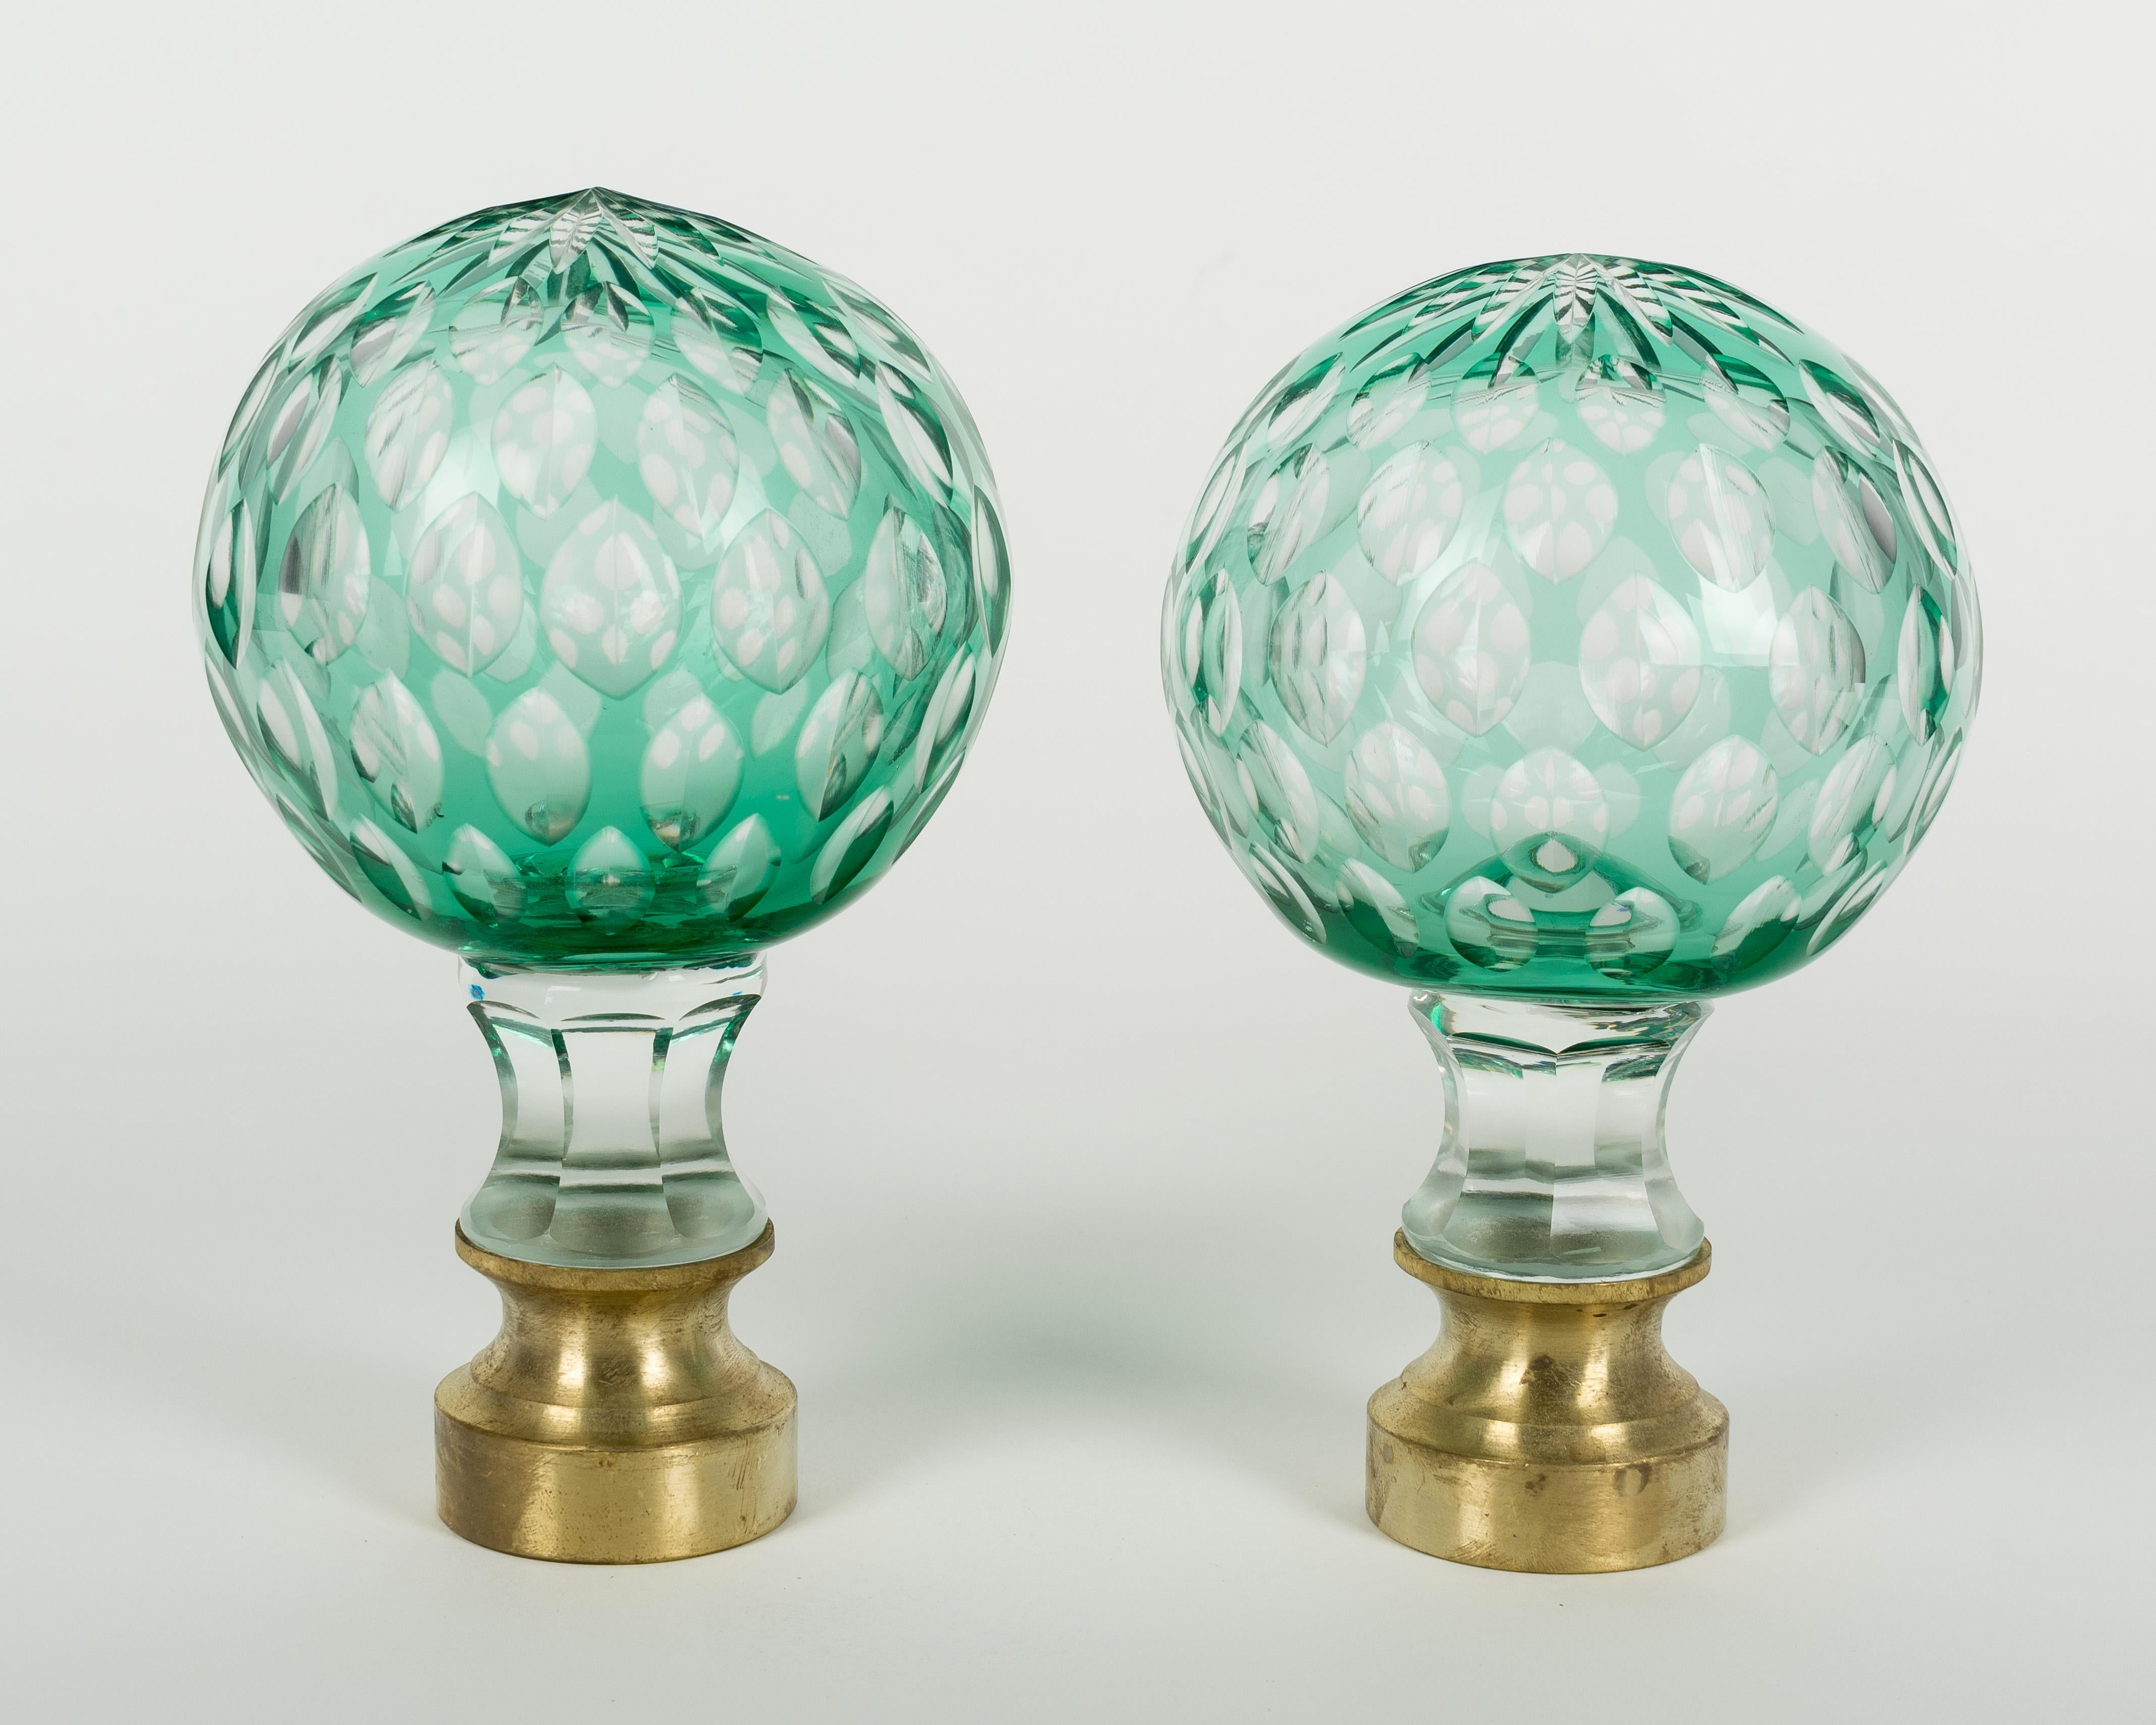 Pair of early 20th century French clear green cut-glass newel post finials or boule d'escalier with a multi-cut star at the top. These wonderful finials were used as decorative elements at the bottom of a staircase on the newel post. Brass hardware